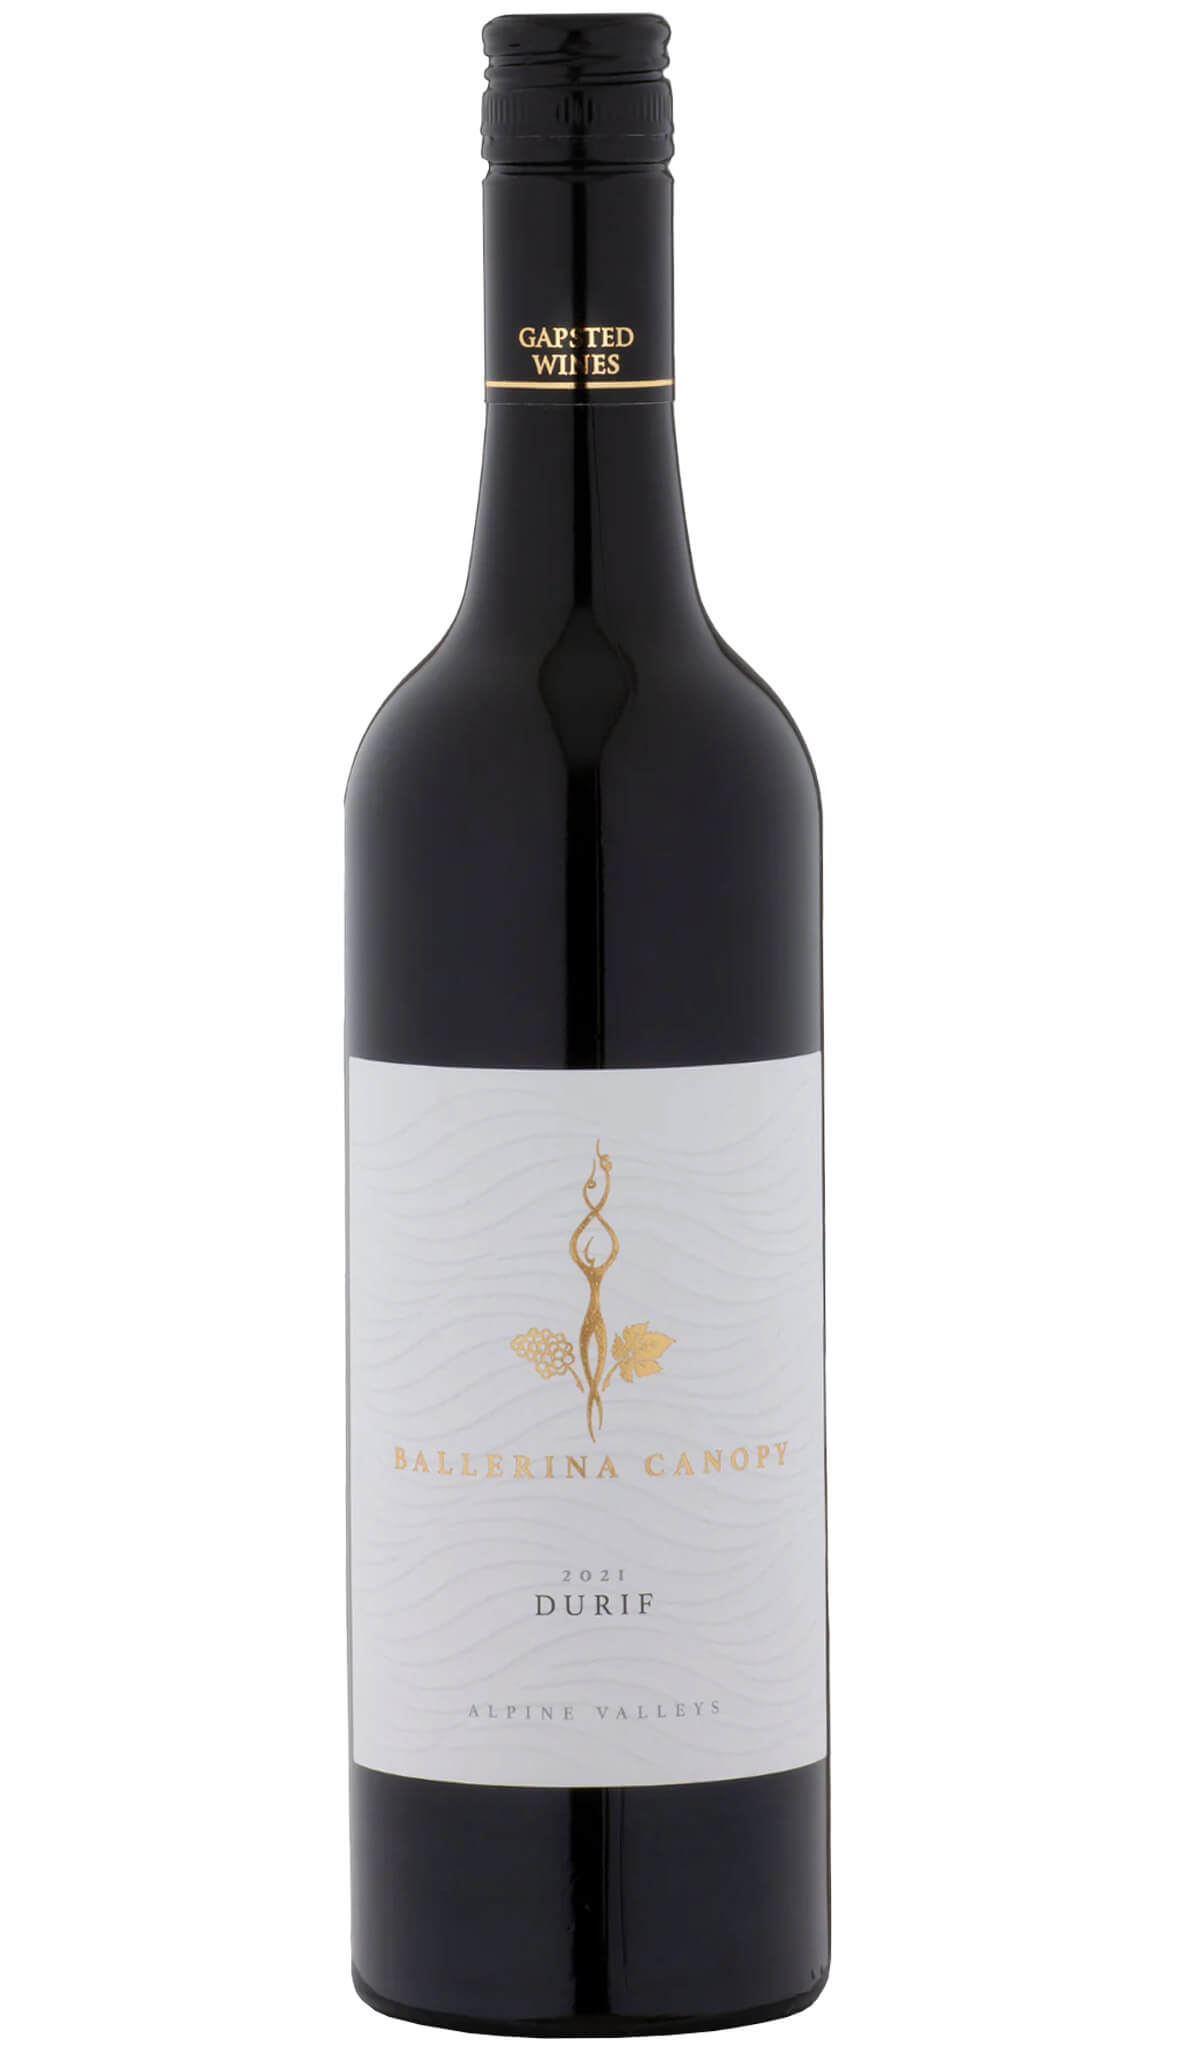 Find out more or buy Gapsted Ballerina Canopy Durif 2021 (High Country) online at Wine Sellers Direct - Australia’s independent liquor specialists.